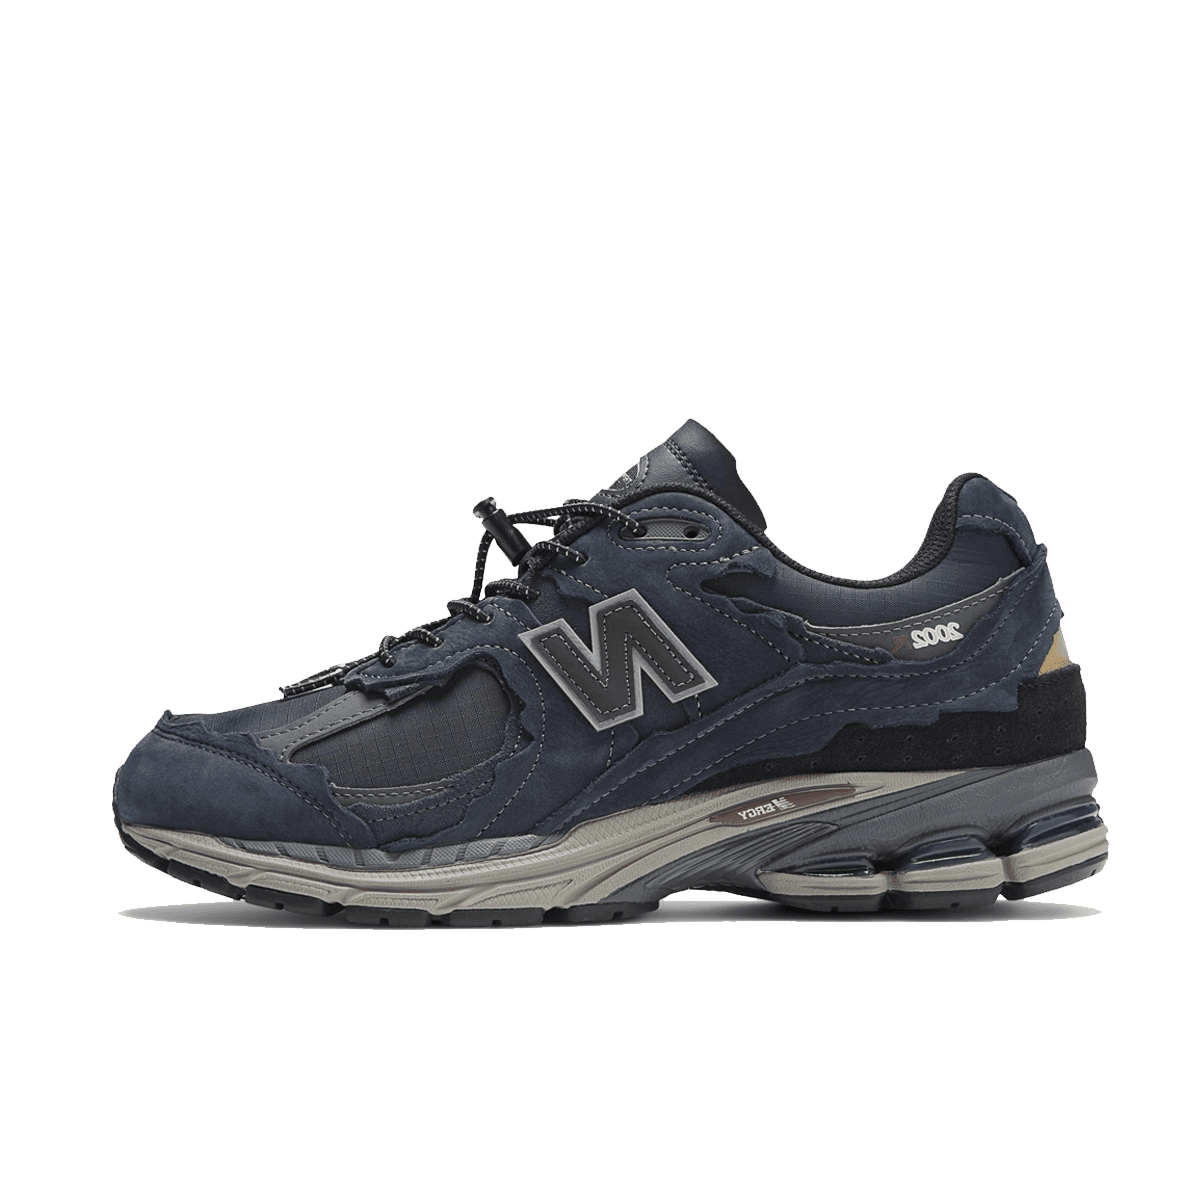 New Balance 2002R 'Navy' - Ripstop Protection Pack